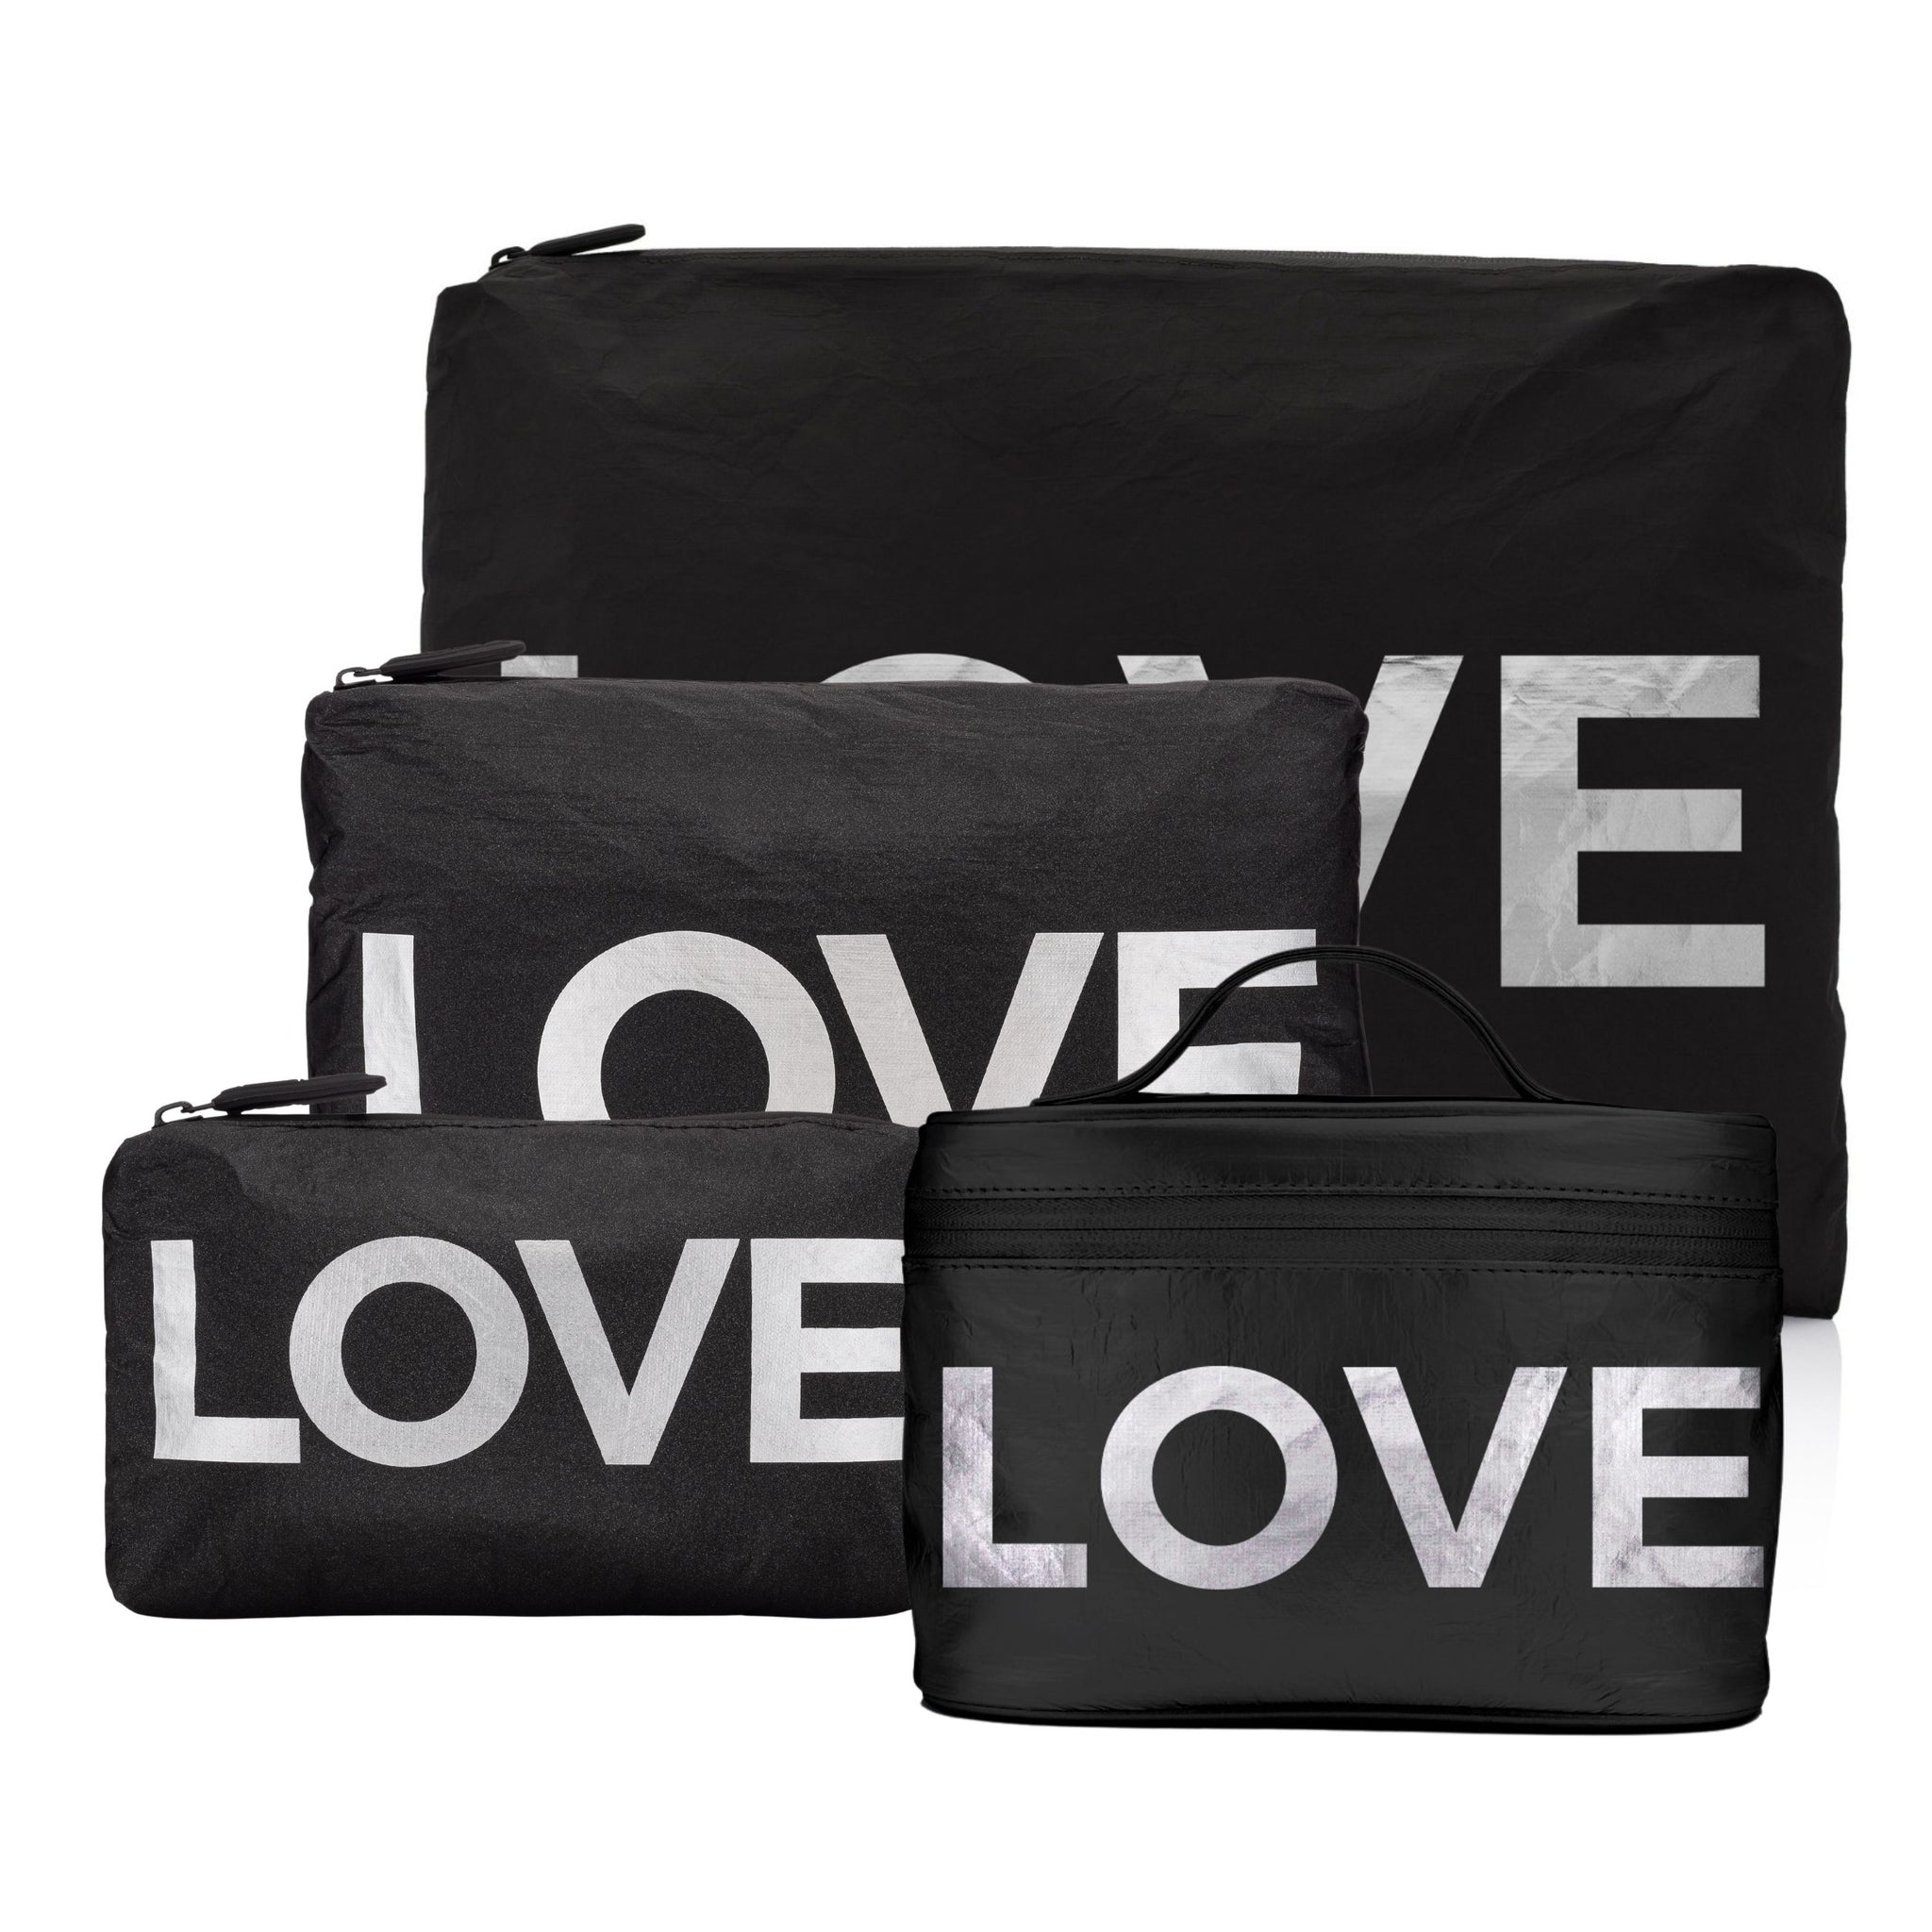 Set of Four - Packing Cubes - Black with Silver LOVE